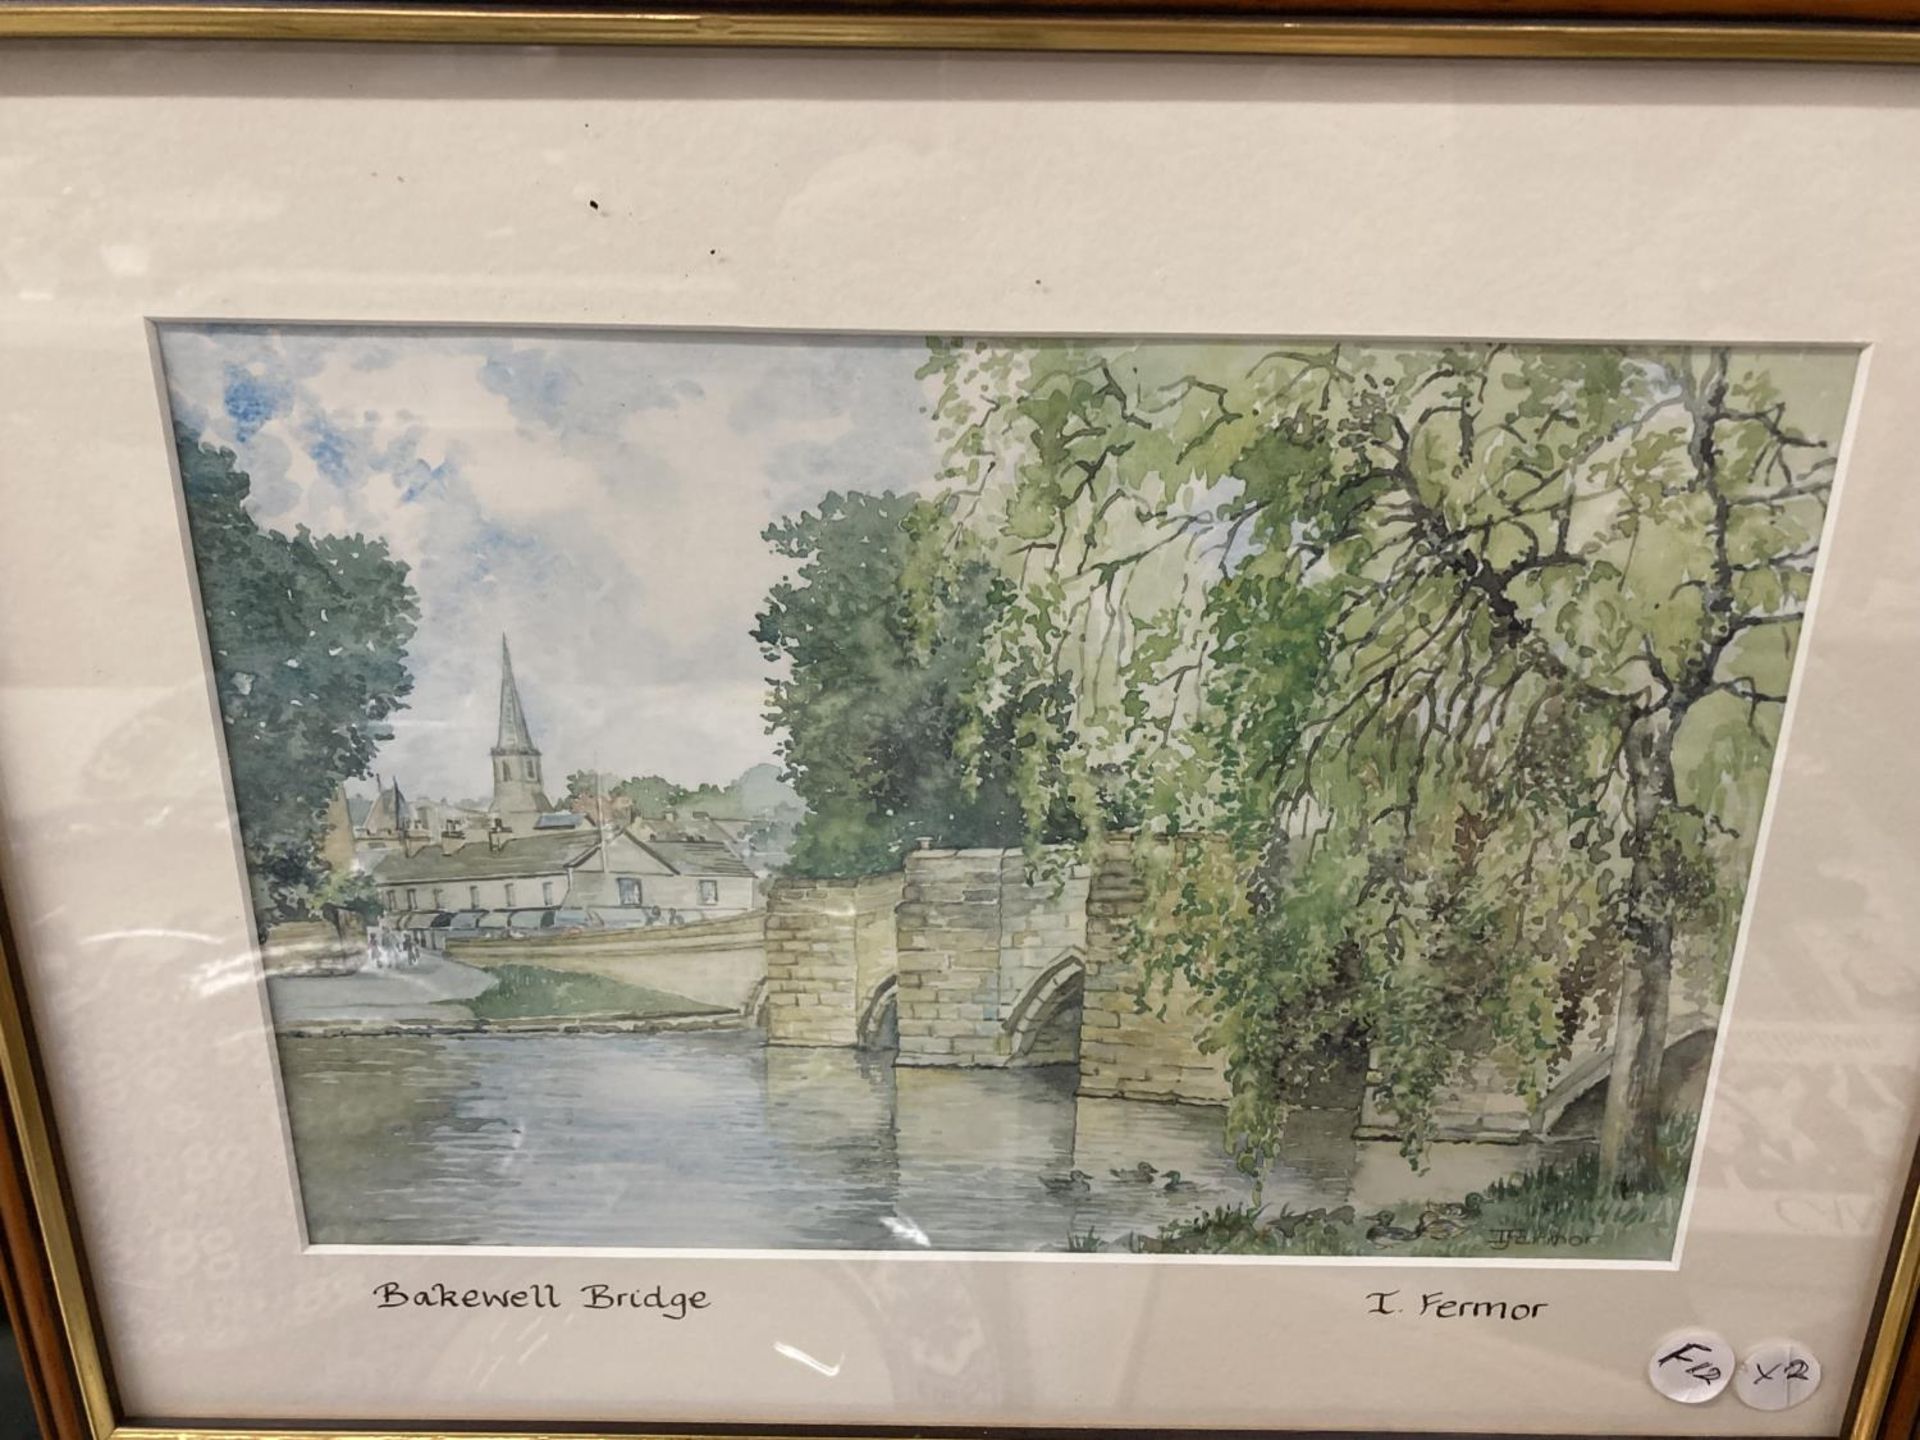 TWO FRAMED PRINTS, 'ASHFORD IN THE WATER' AND 'BAKEWELL BRIDGE', SIGNED I FERMOR - Image 3 of 3